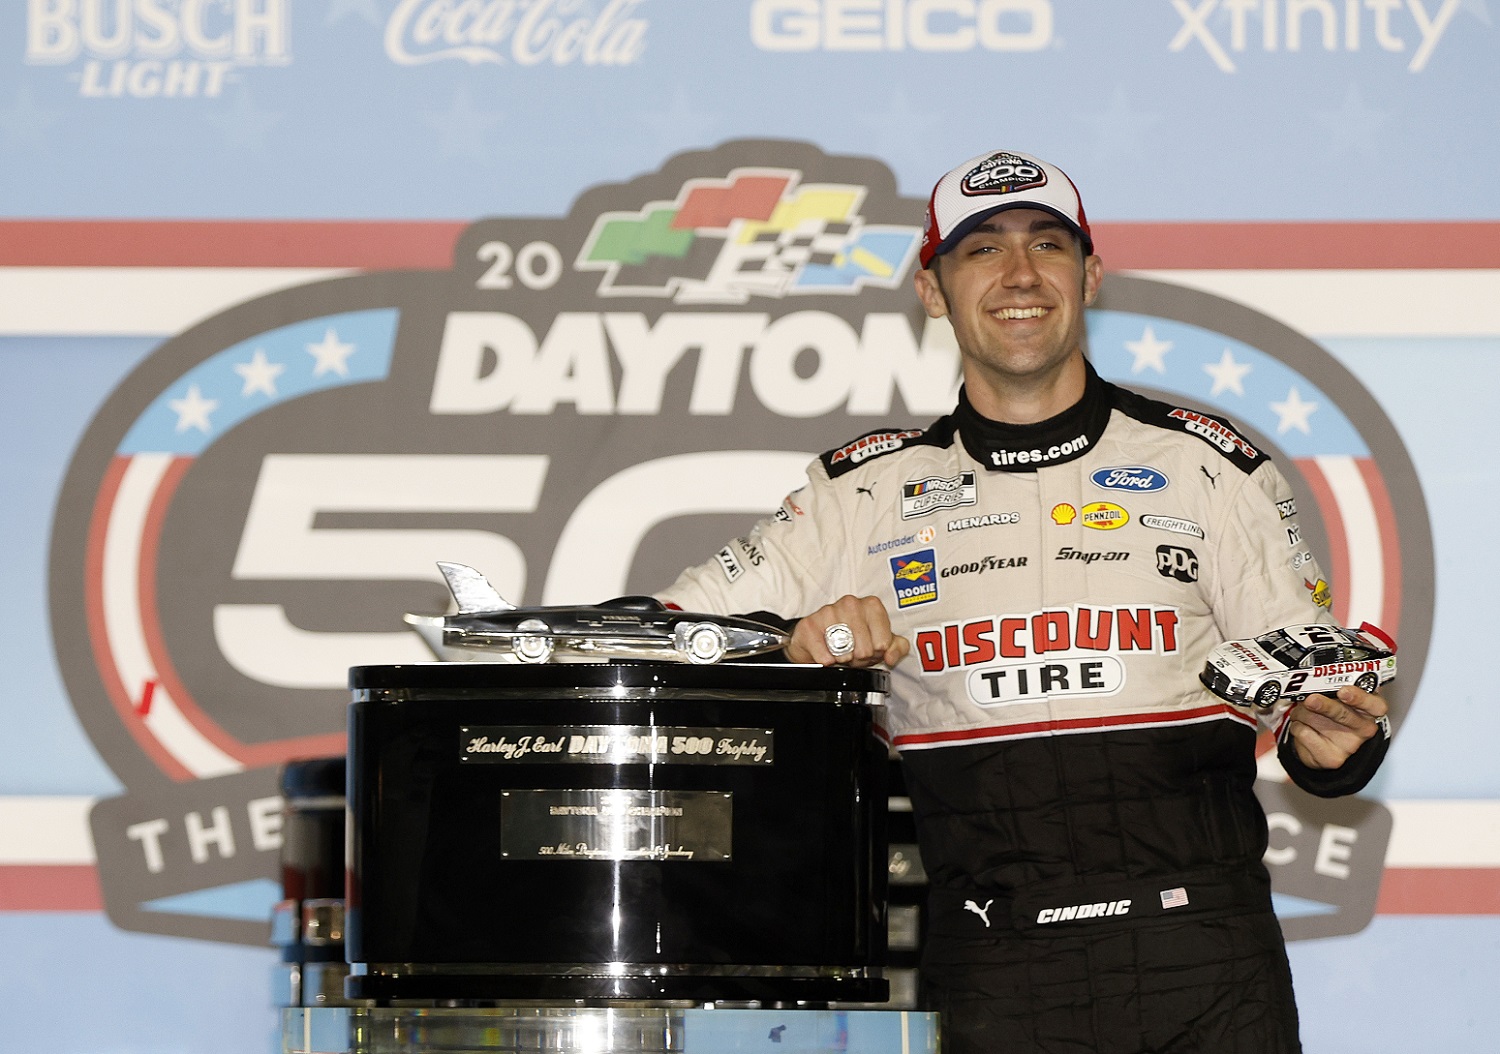 How Many Daytona 500 Drivers Made the Race Their First NASCAR Win?